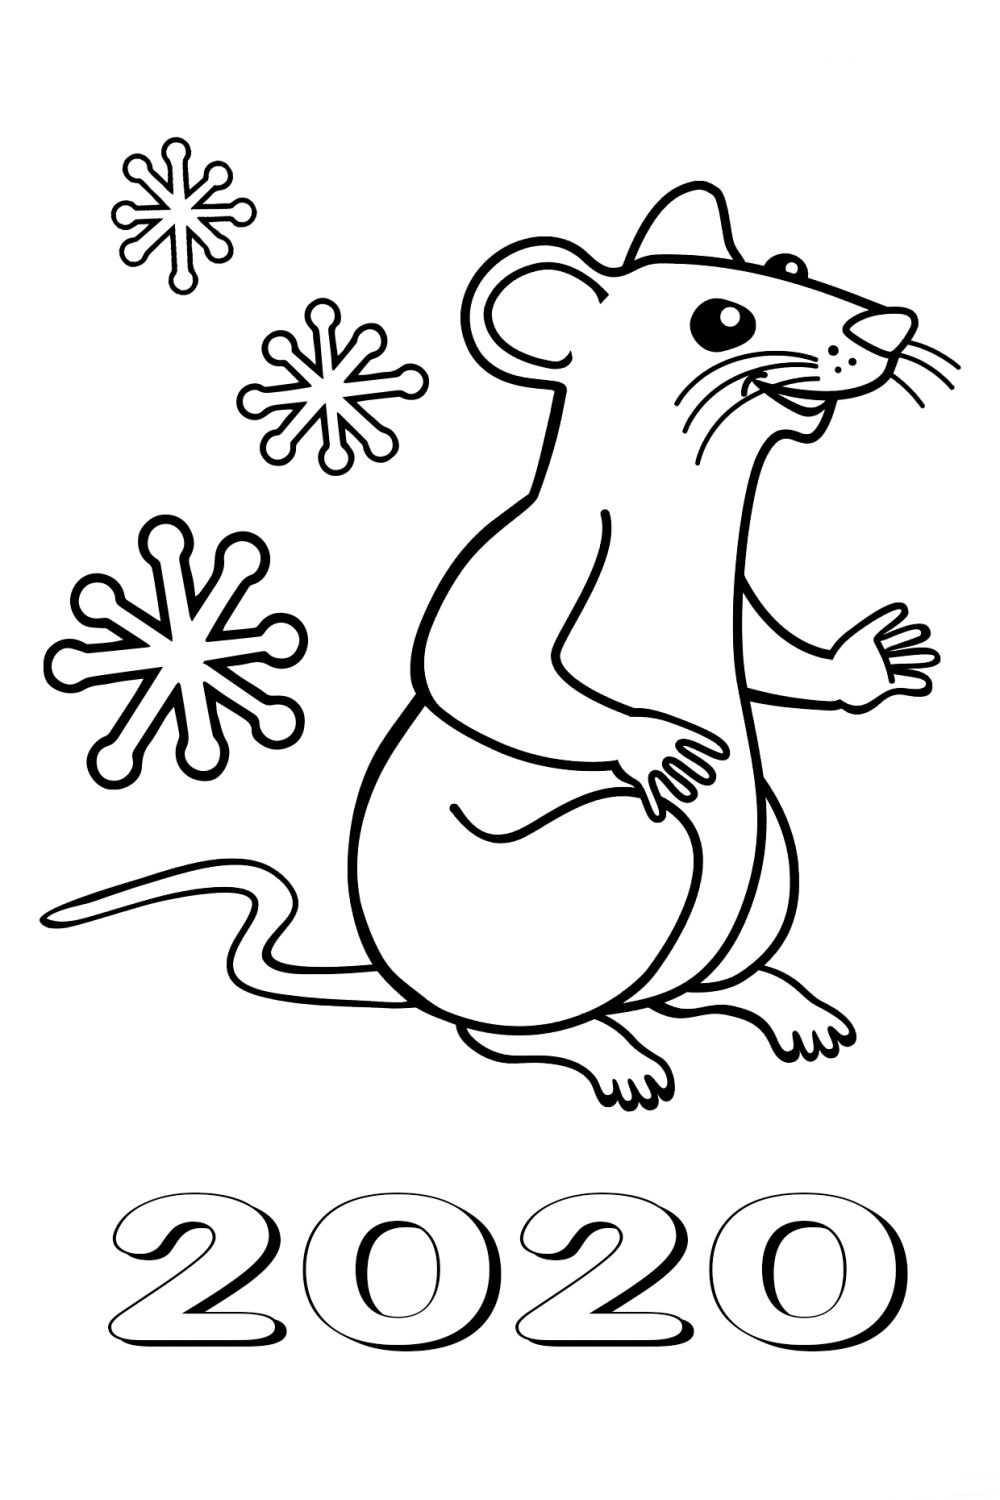 2020 Coloring Sheet Coloring Pages